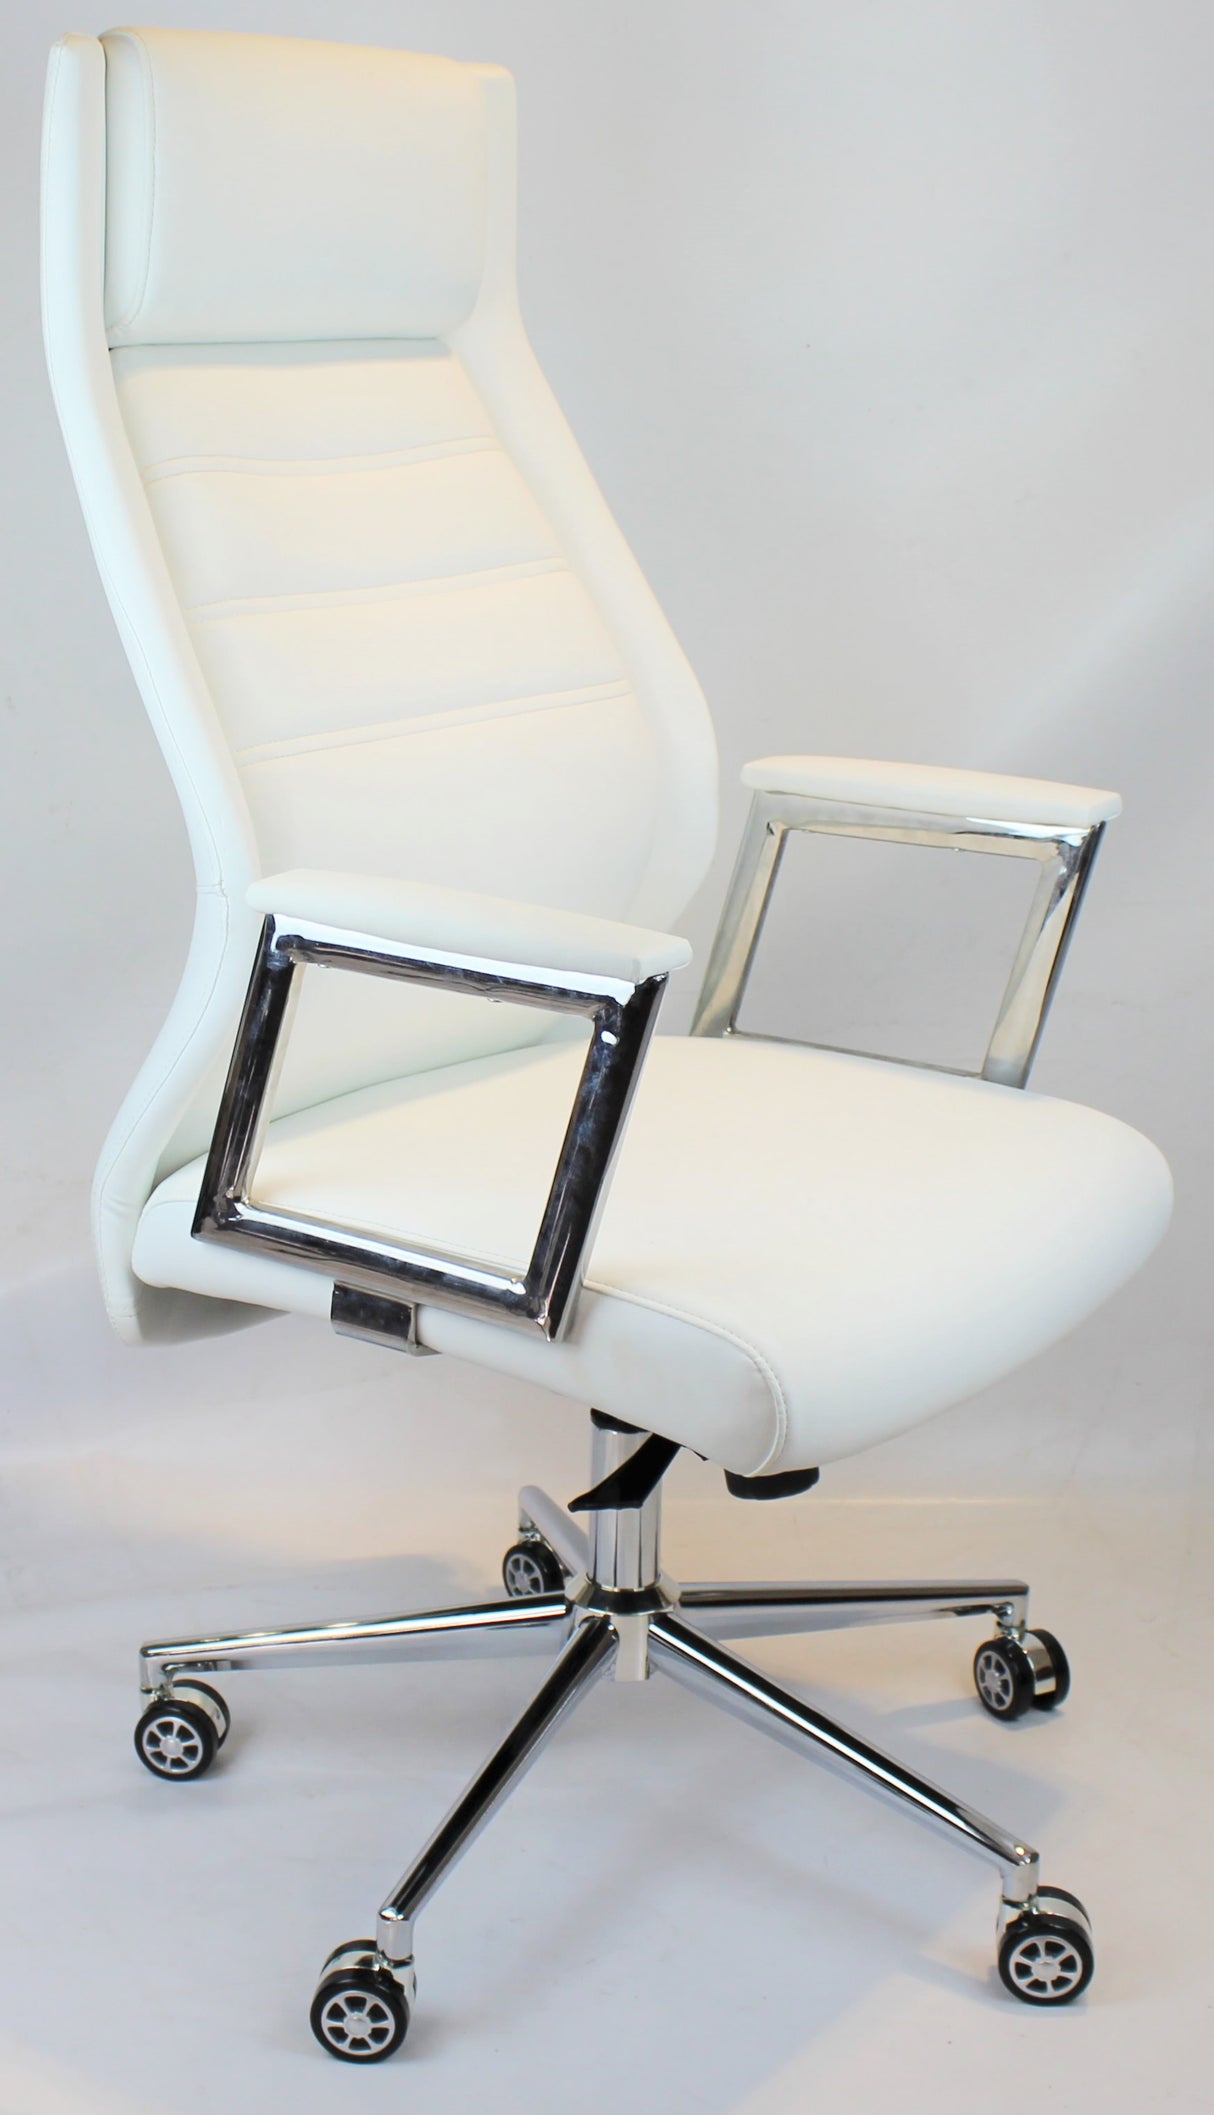 Modern White Leather Executive Office Chair - DH-103